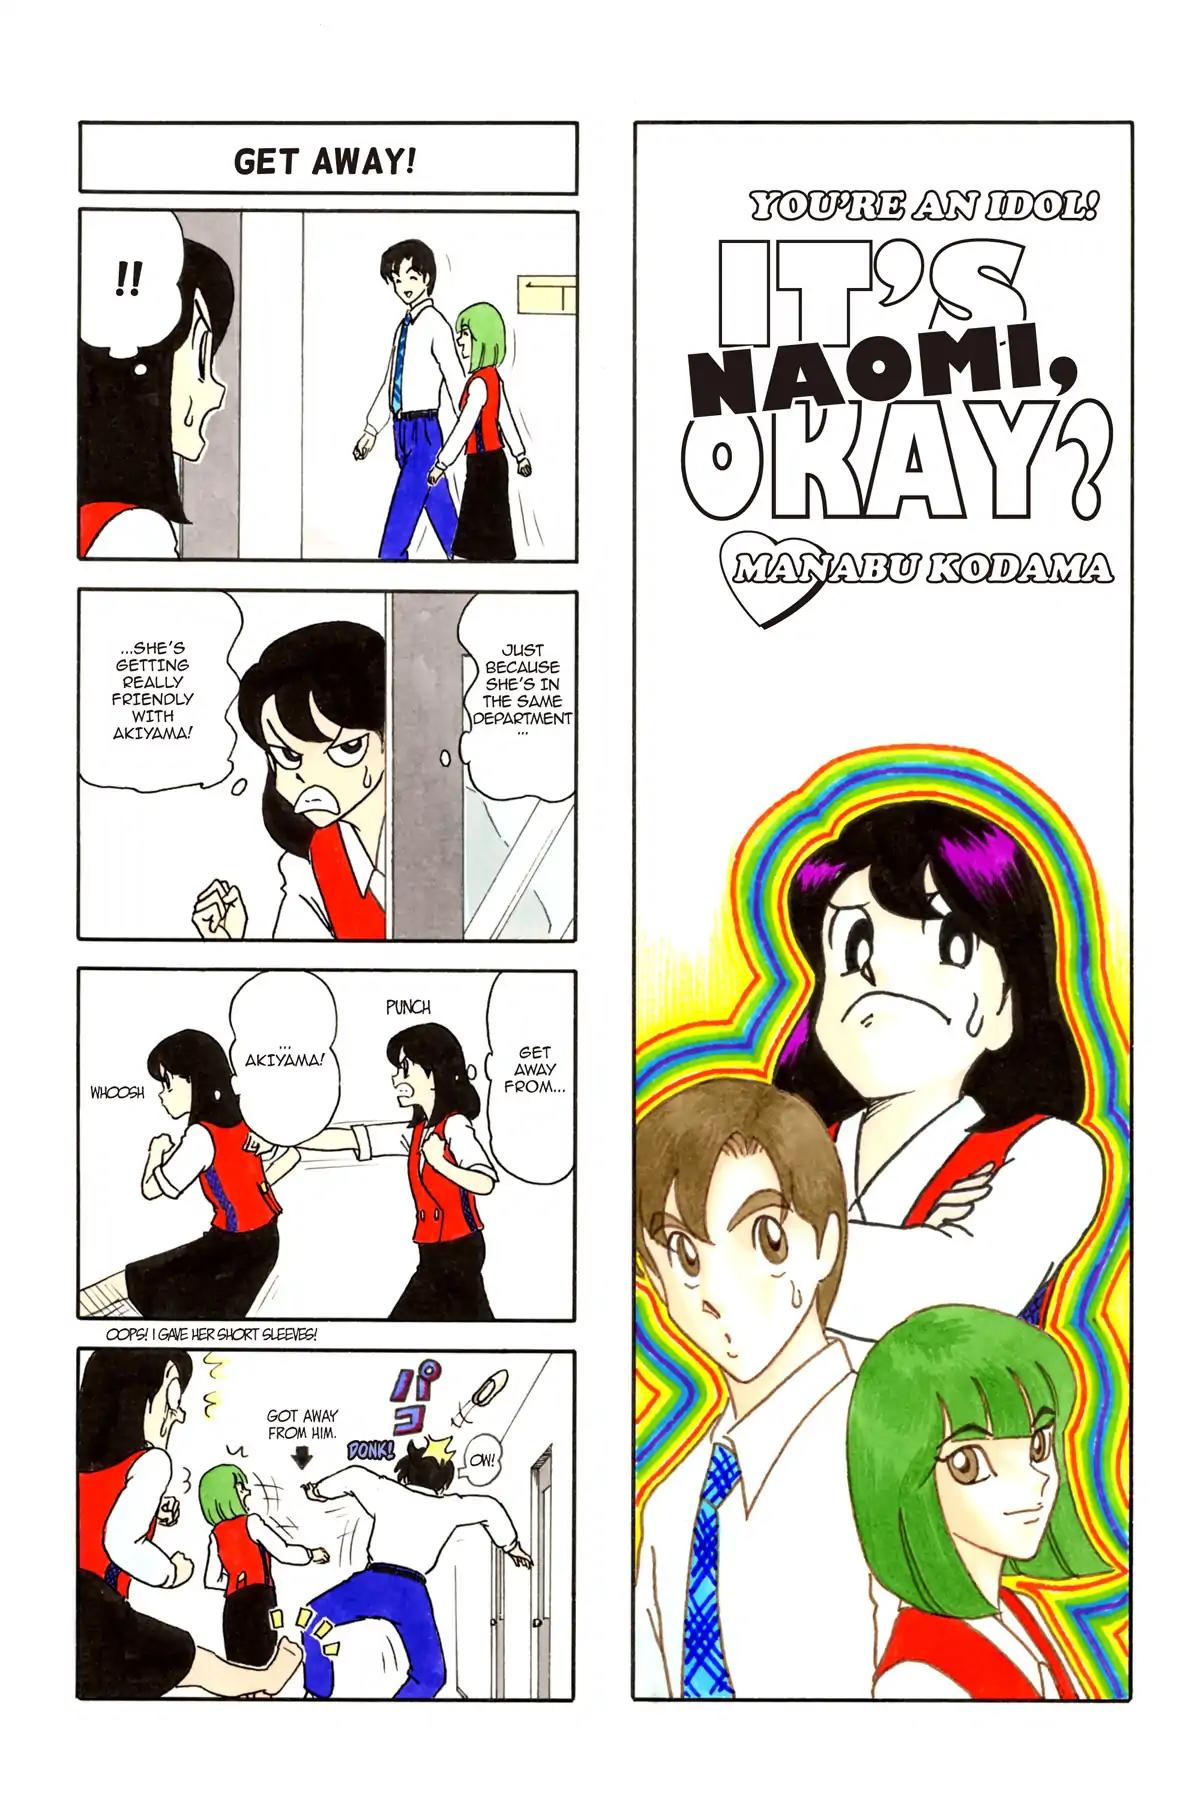 It's Naomi, Okay? After 16 Vol 1 Chapter 15